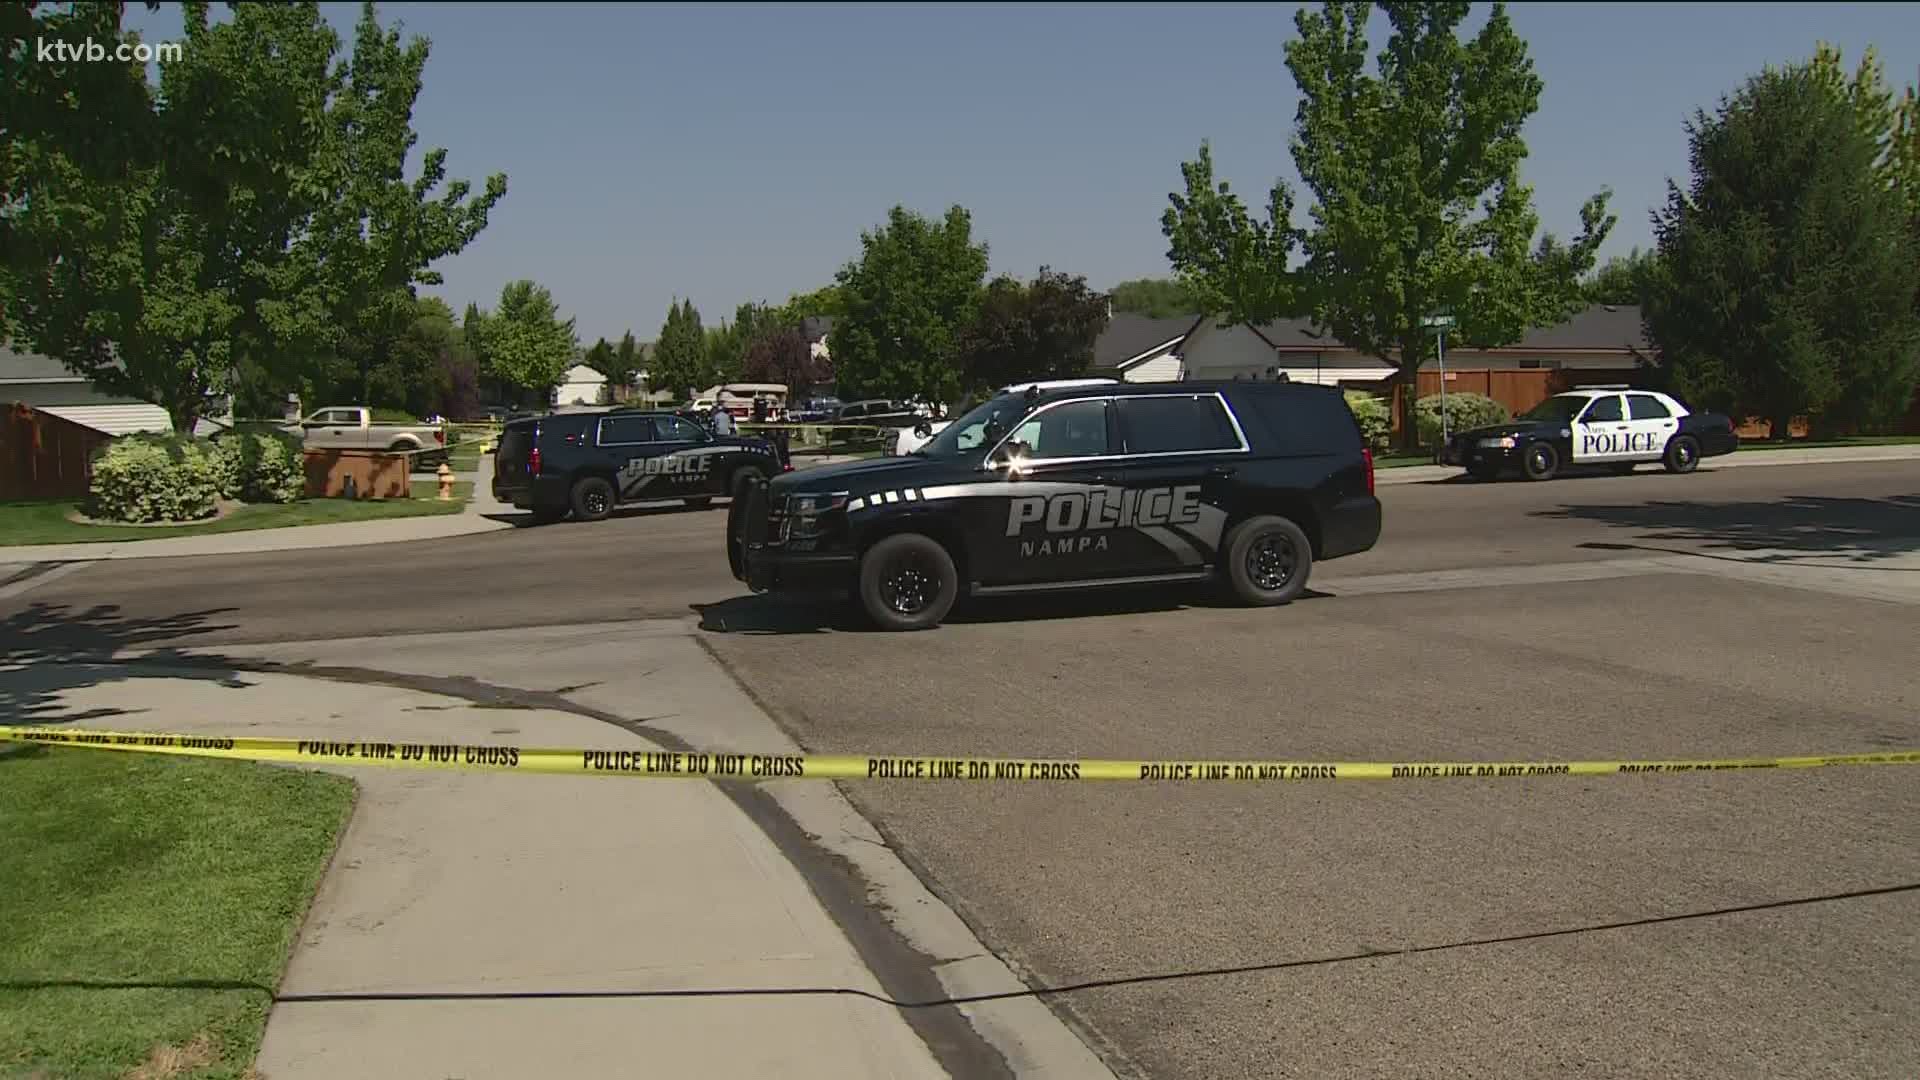 According to Nampa Police, the woman refused to get out of her vehicle, then rammed a patrol car, then pulled out her gun and fired at officers after a car chase.